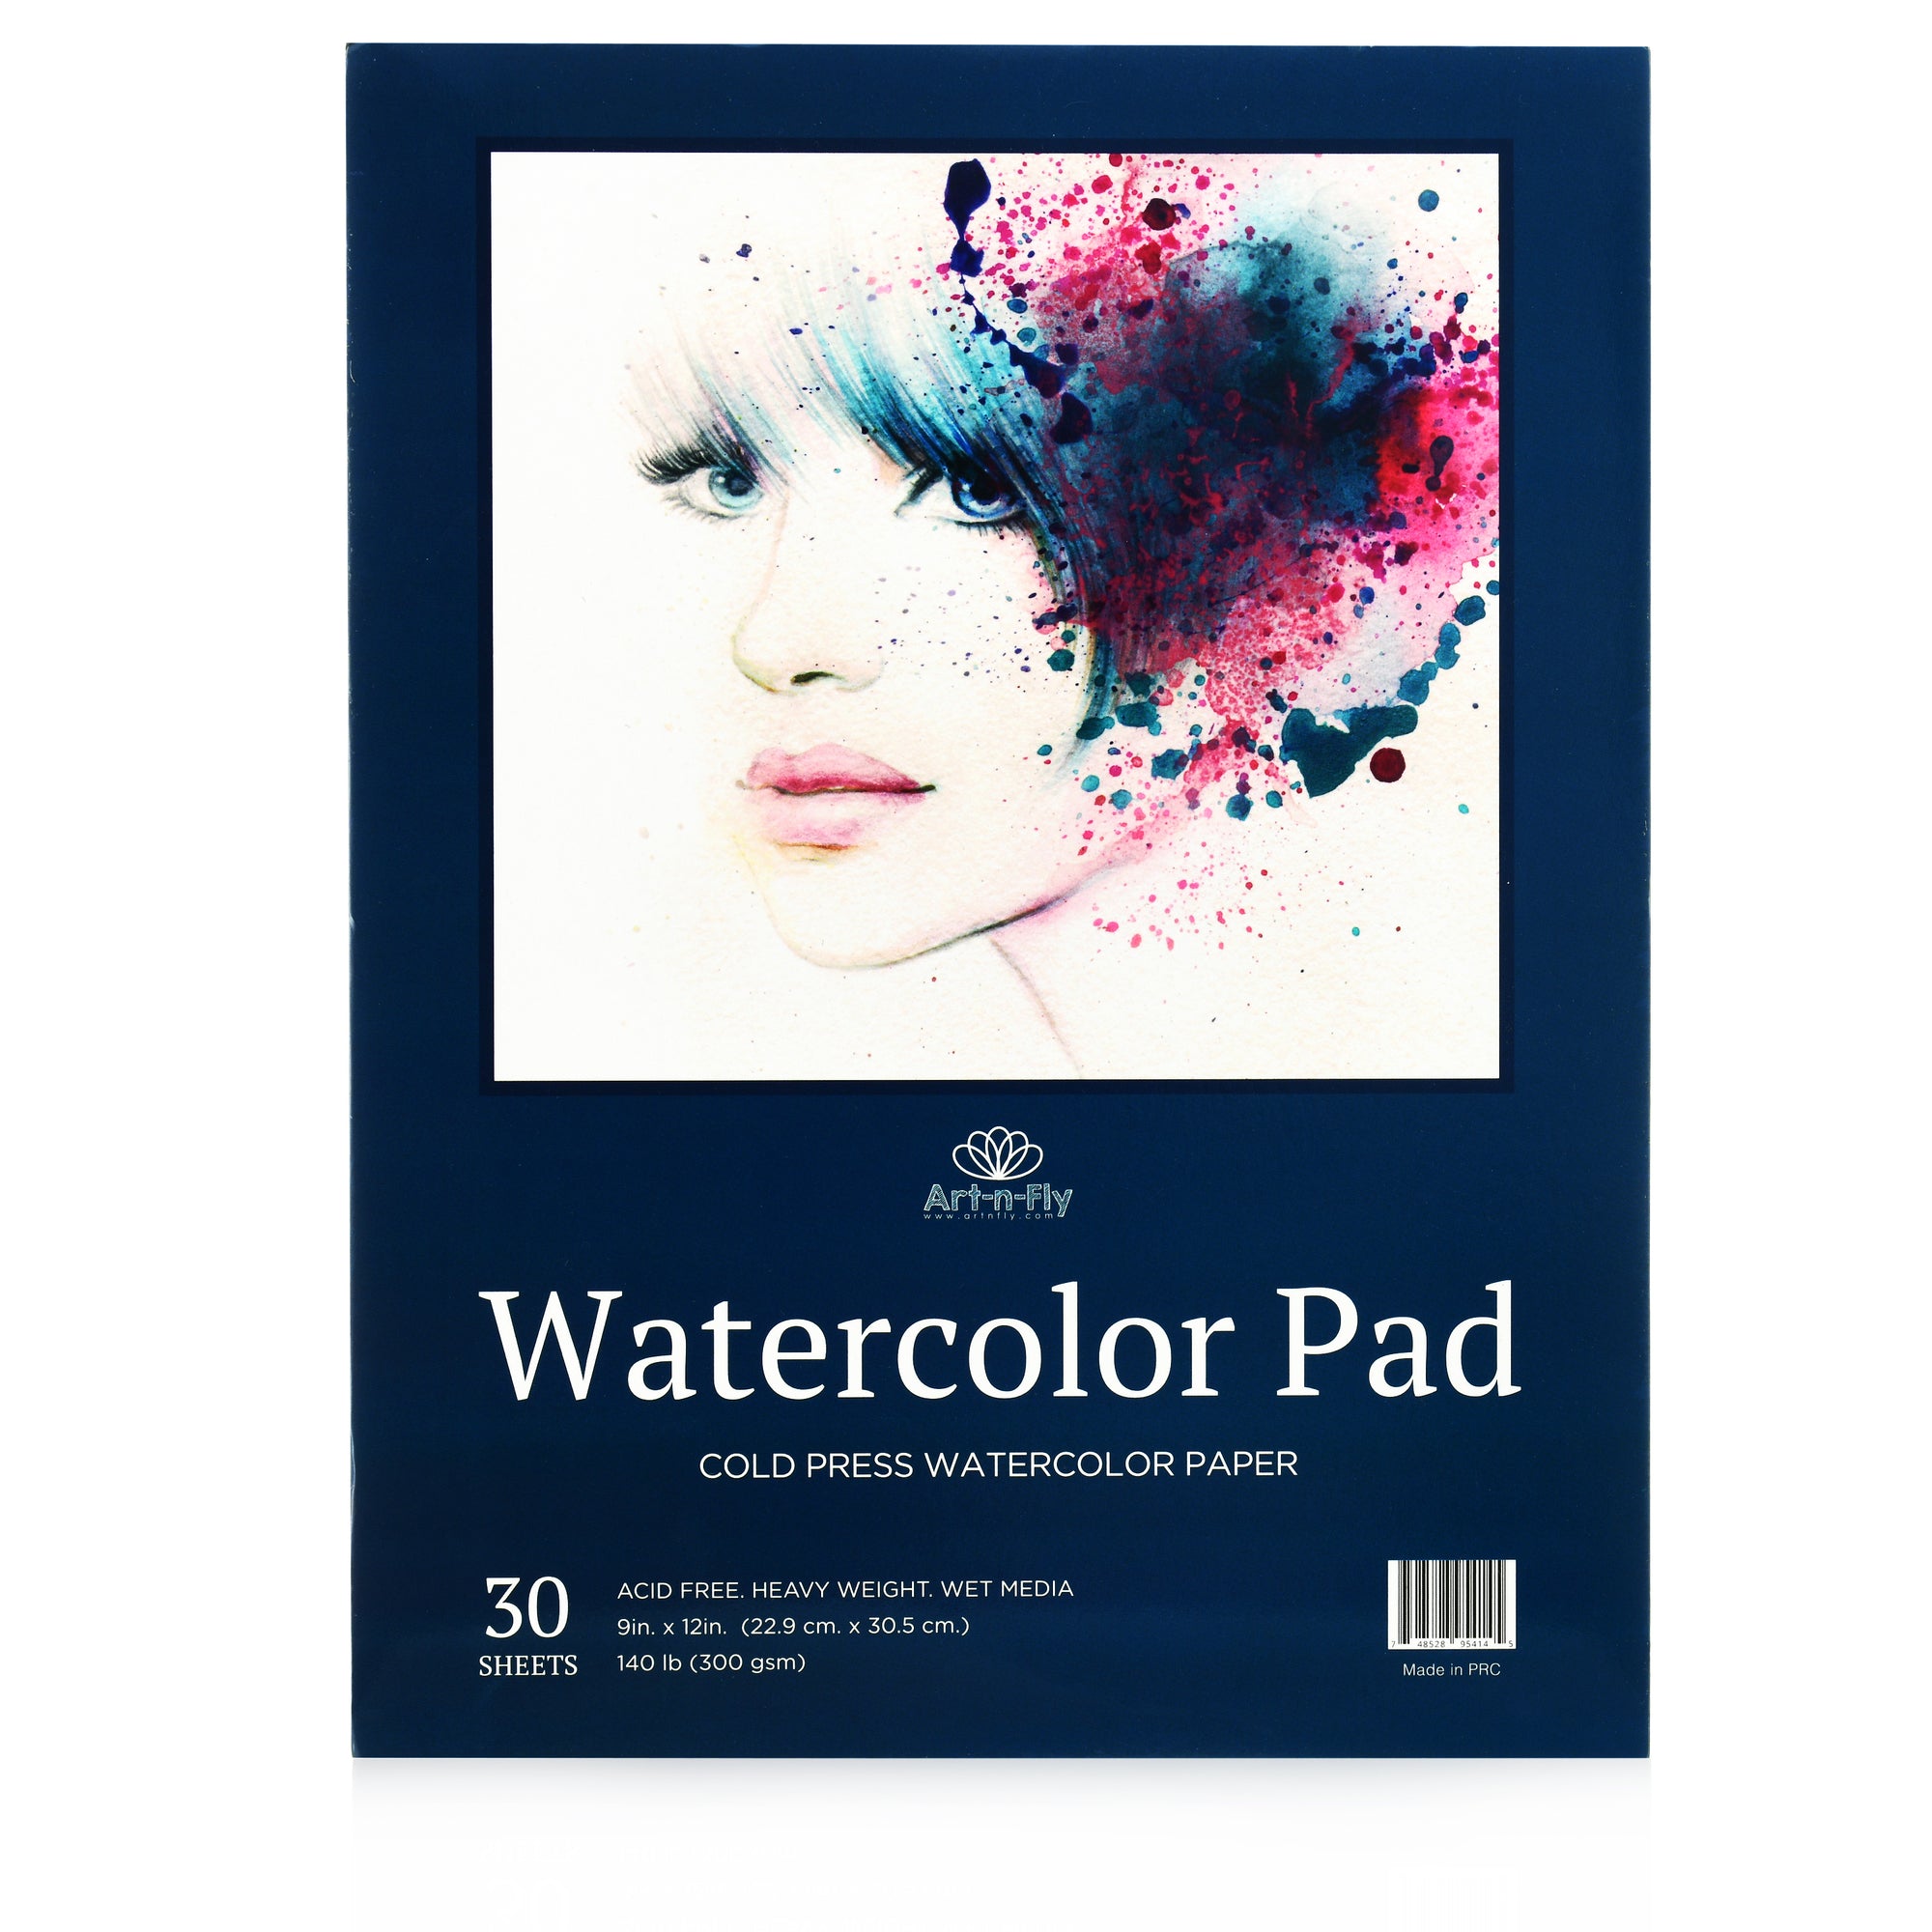 Art-n-Fly Watercolor Paper Pad 9x12 2 Pack - Cold Press Water Color Sketchbook Pad 30 Sheets 140 lb for Art Painting, Drawing, Wet & Mixed Media - W